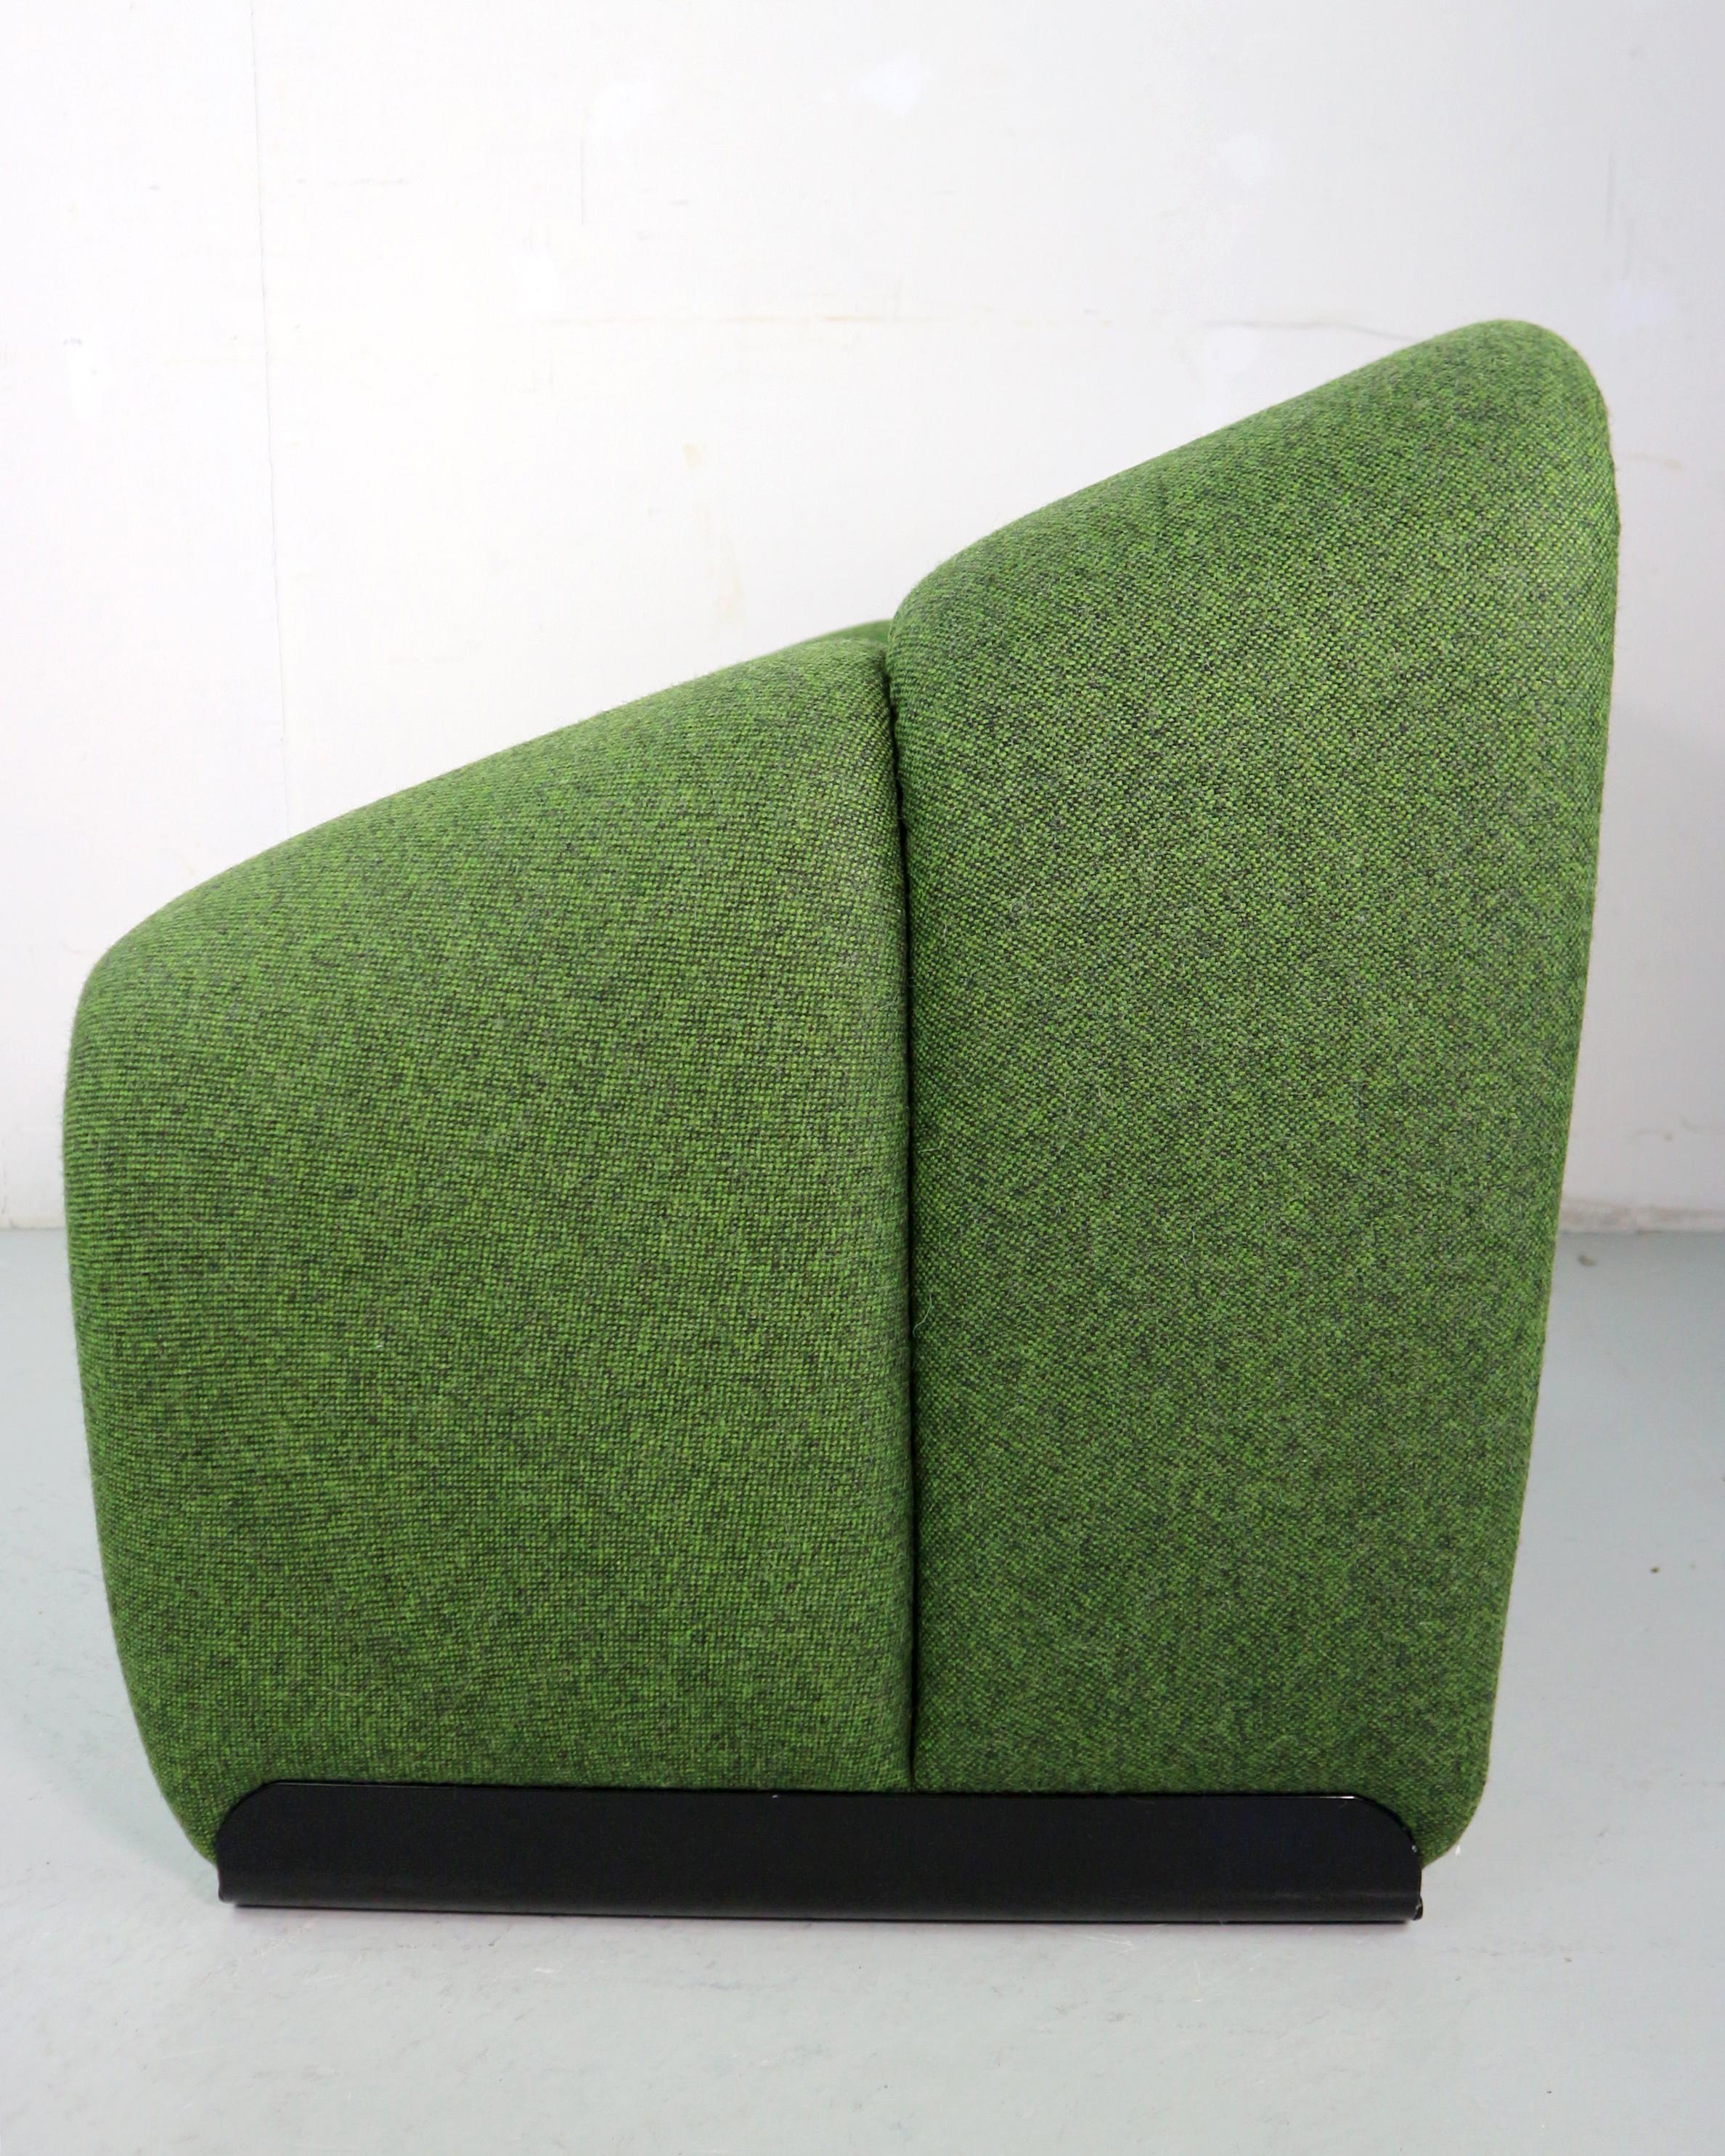 Pierre Paulin F598 Groovy Armchair for Artifort  In Excellent Condition For Sale In The Hague, NL